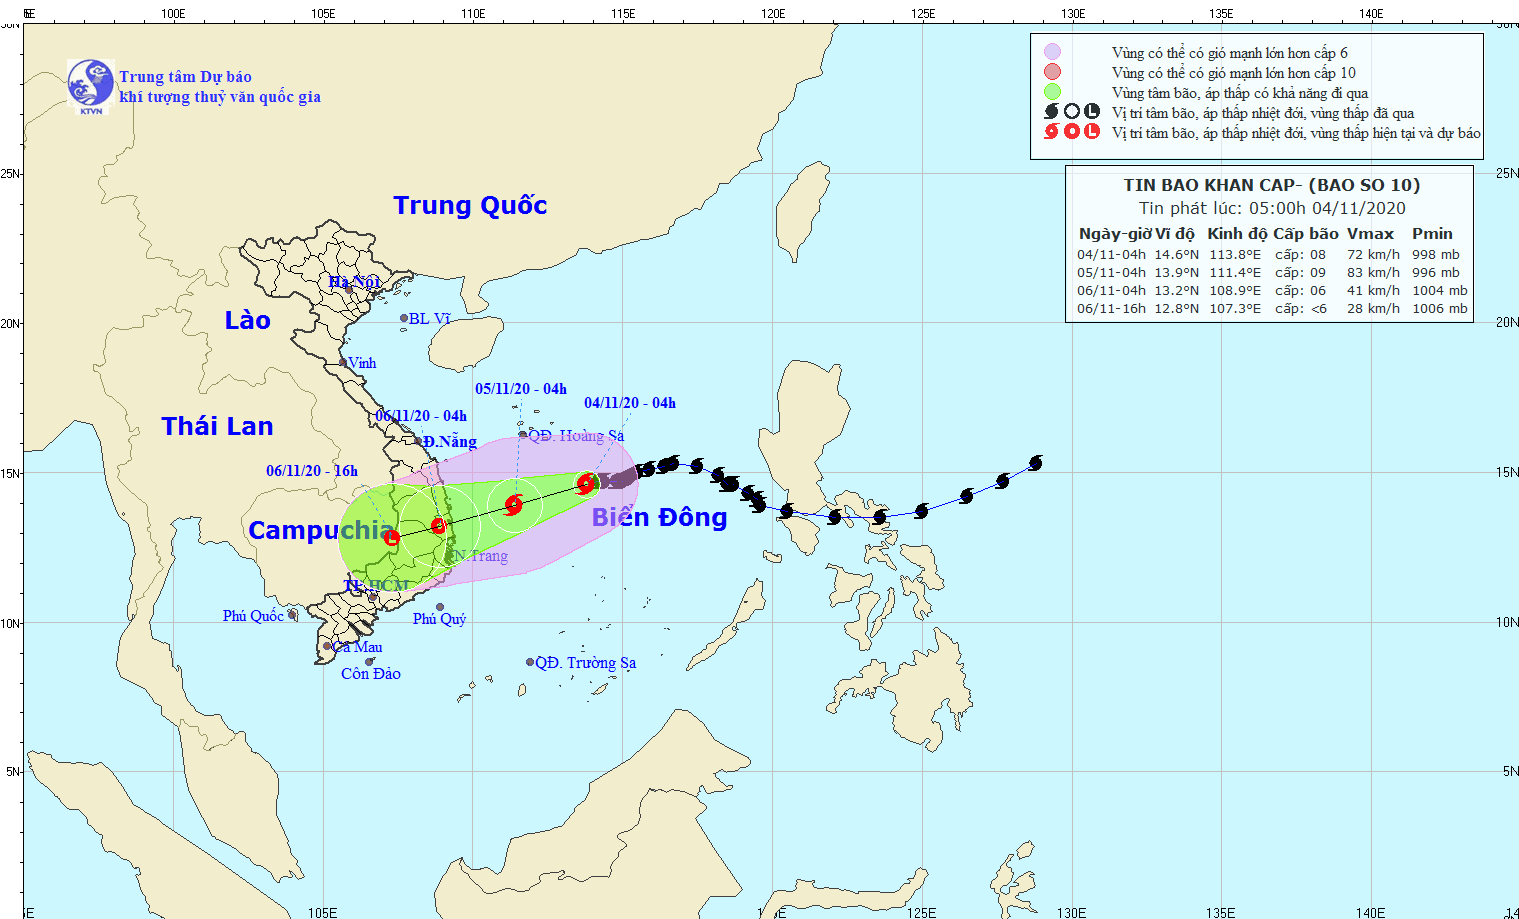 Storm Goni heads towards provinces from Quang Ngai to Khanh Hoa 